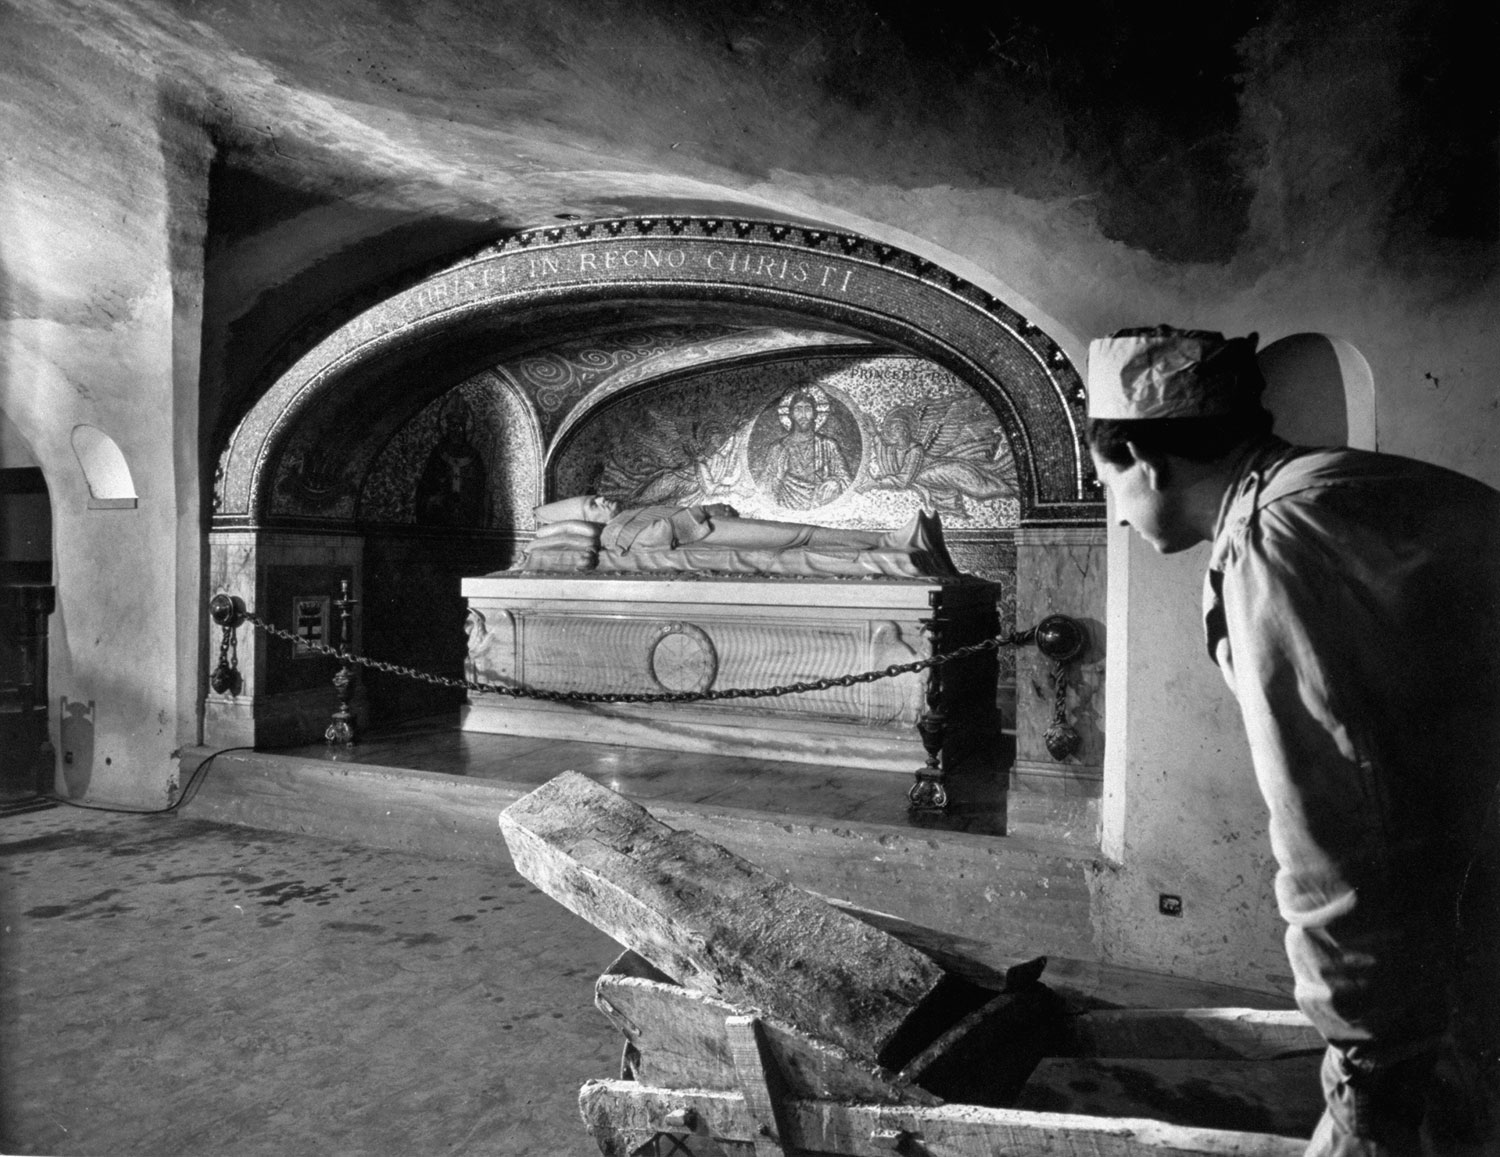 Pope Pius XI, whose desire to be buried below St. Peter's nave led to the historic excavations, lies in his stone sarcophagus in renovated upper grottoes.